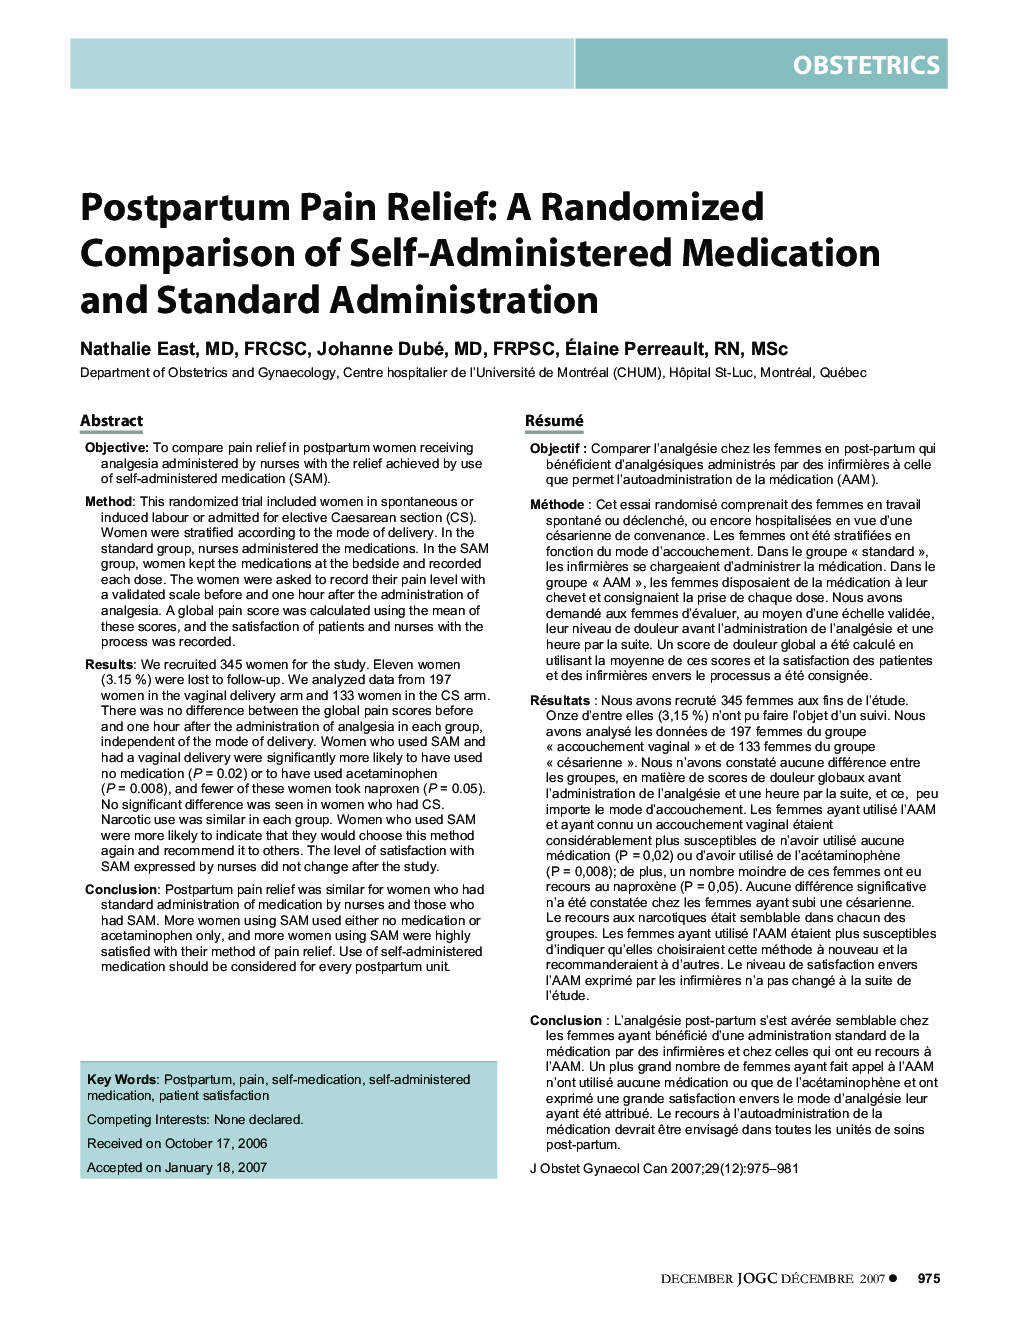 Postpartum Pain Relief: A Randomized Comparison of Self-Administered Medication and Standard Administration